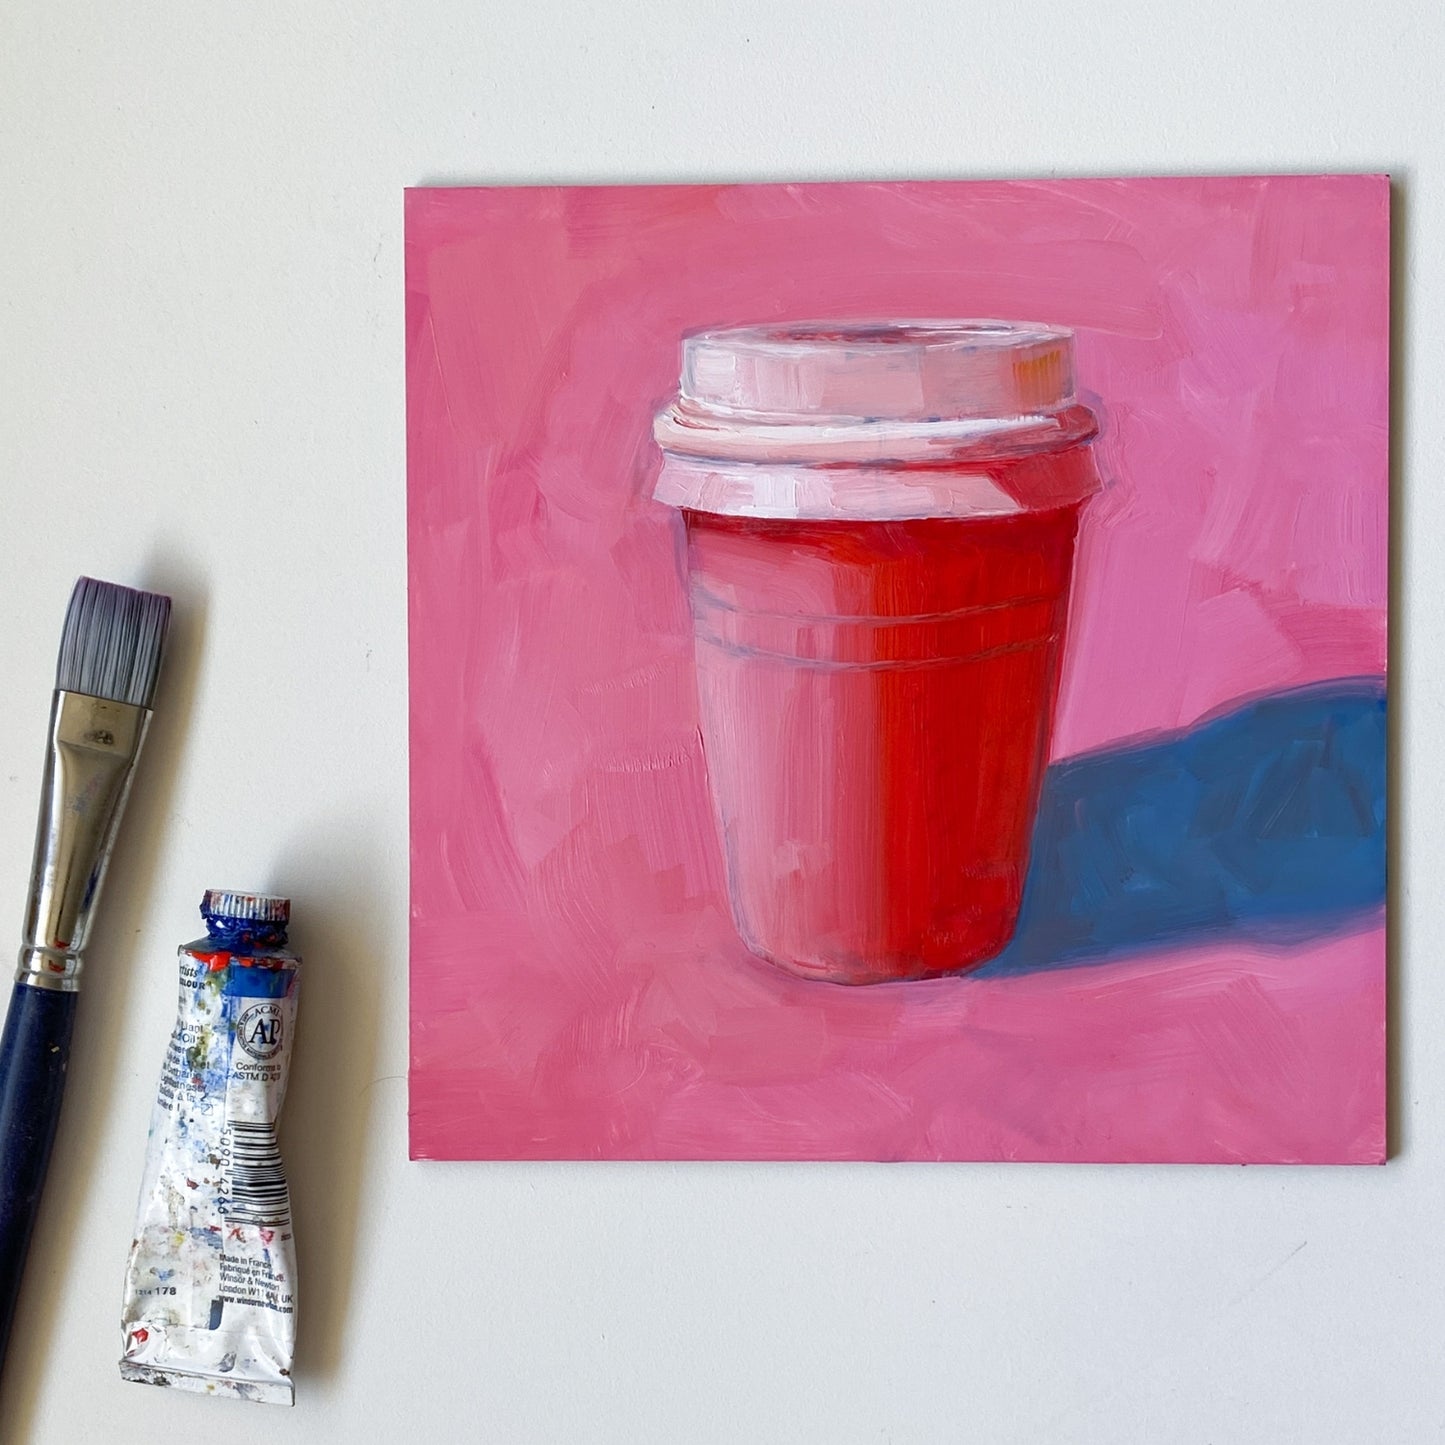 styled photo of an original oil painting of a pink and red take away coffee cup on a textured bright pink background with strong greyish blue shadows. The painting is on a white desk and there's a paintbrush and oil paint tube next to it.